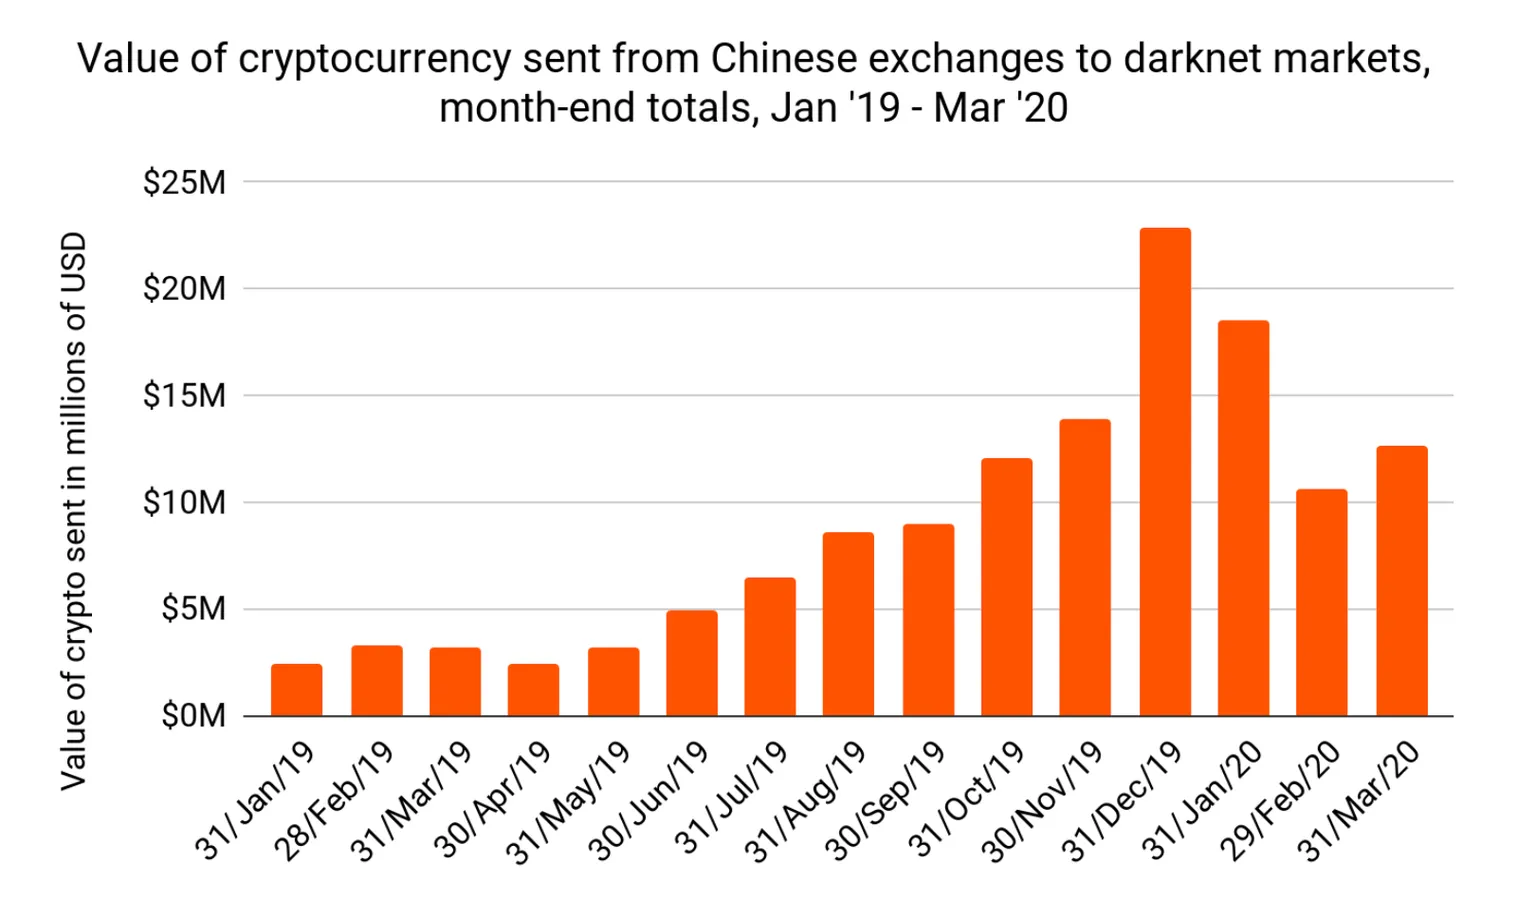 Bitcoin sent from Chinese exchanges to dark net markets